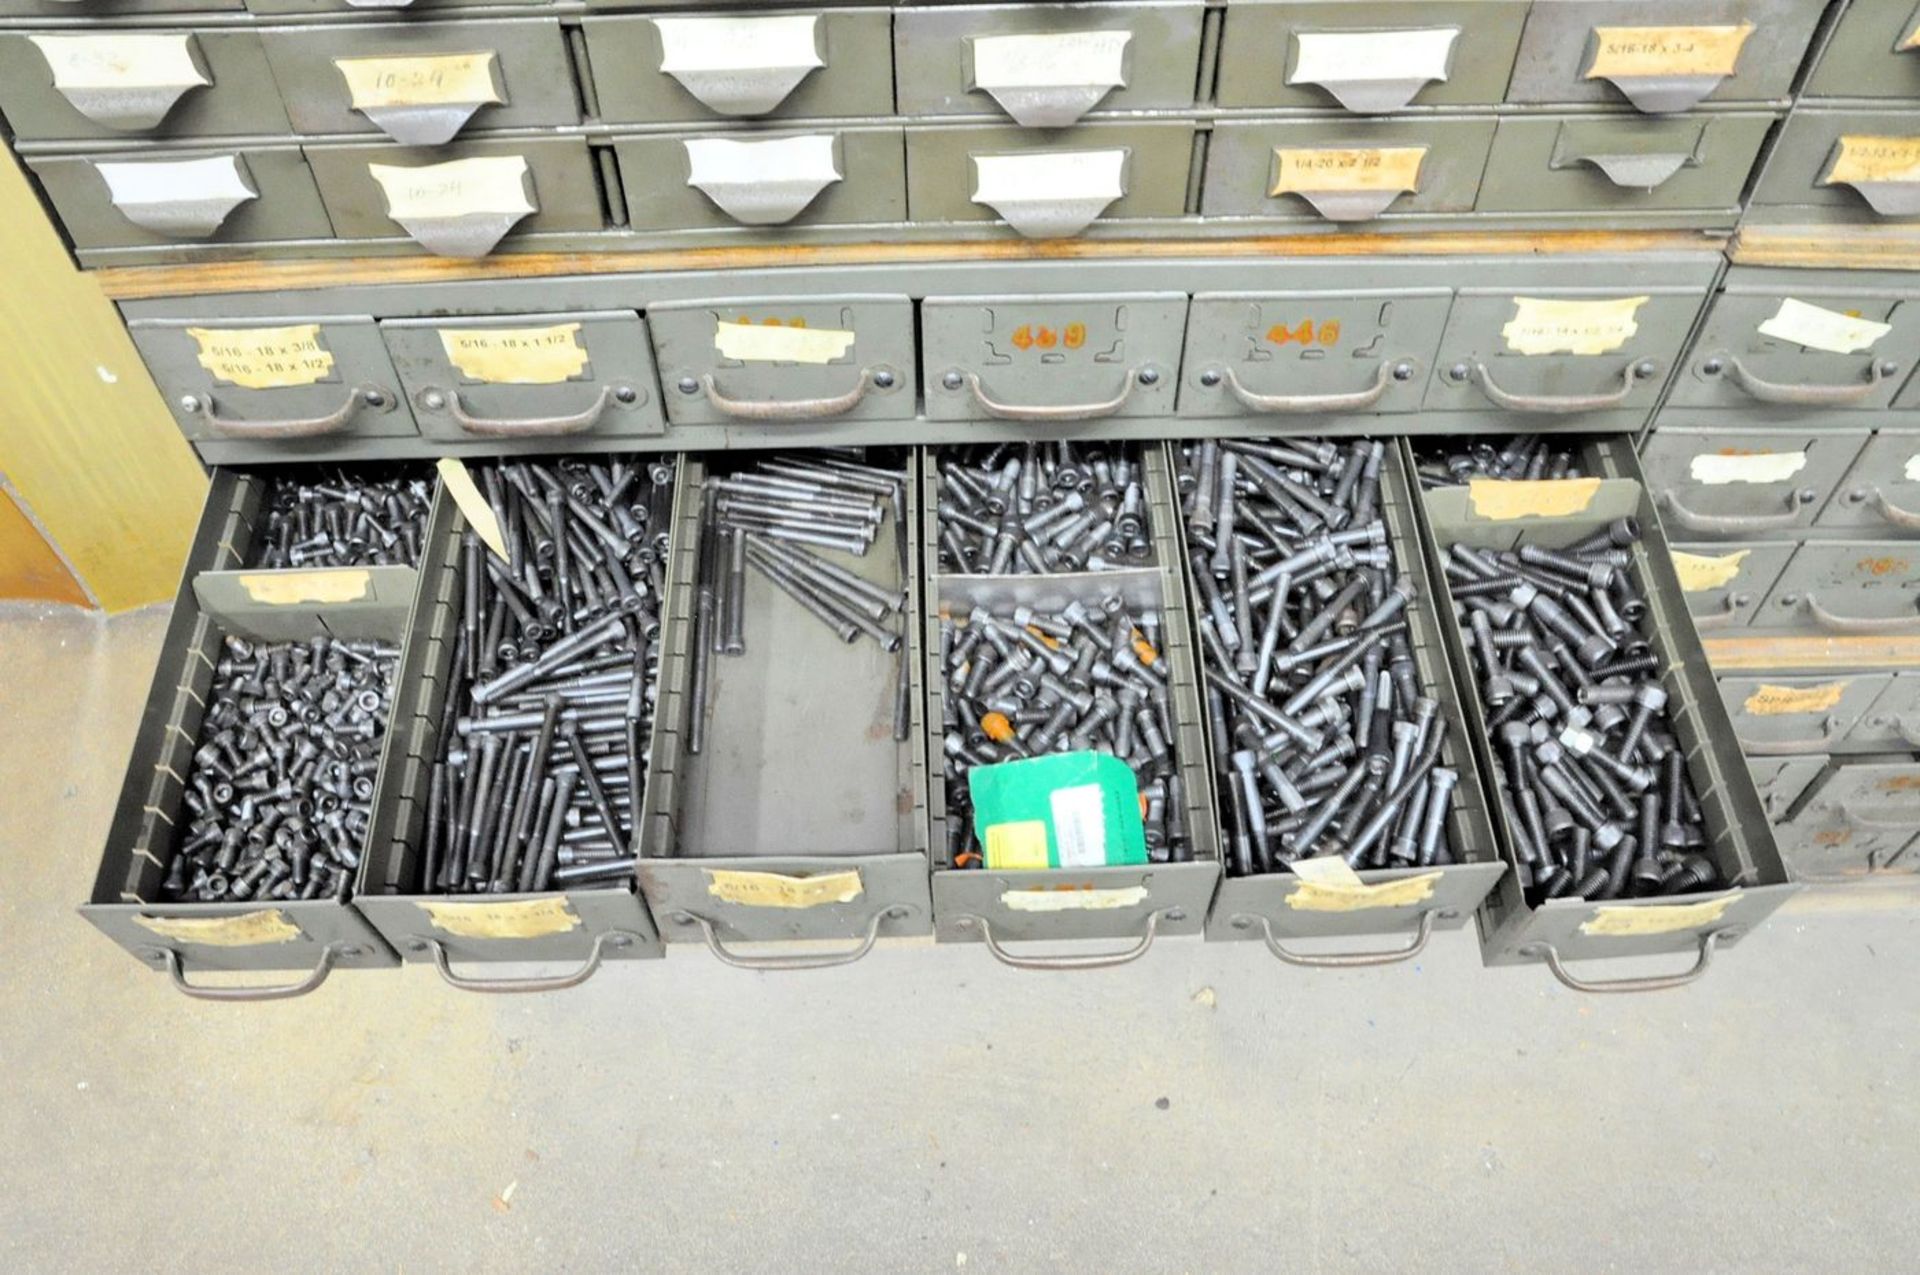 Lot - (84) Organizer Bins with Bolt and Screw Hardware Contents - Image 11 of 15